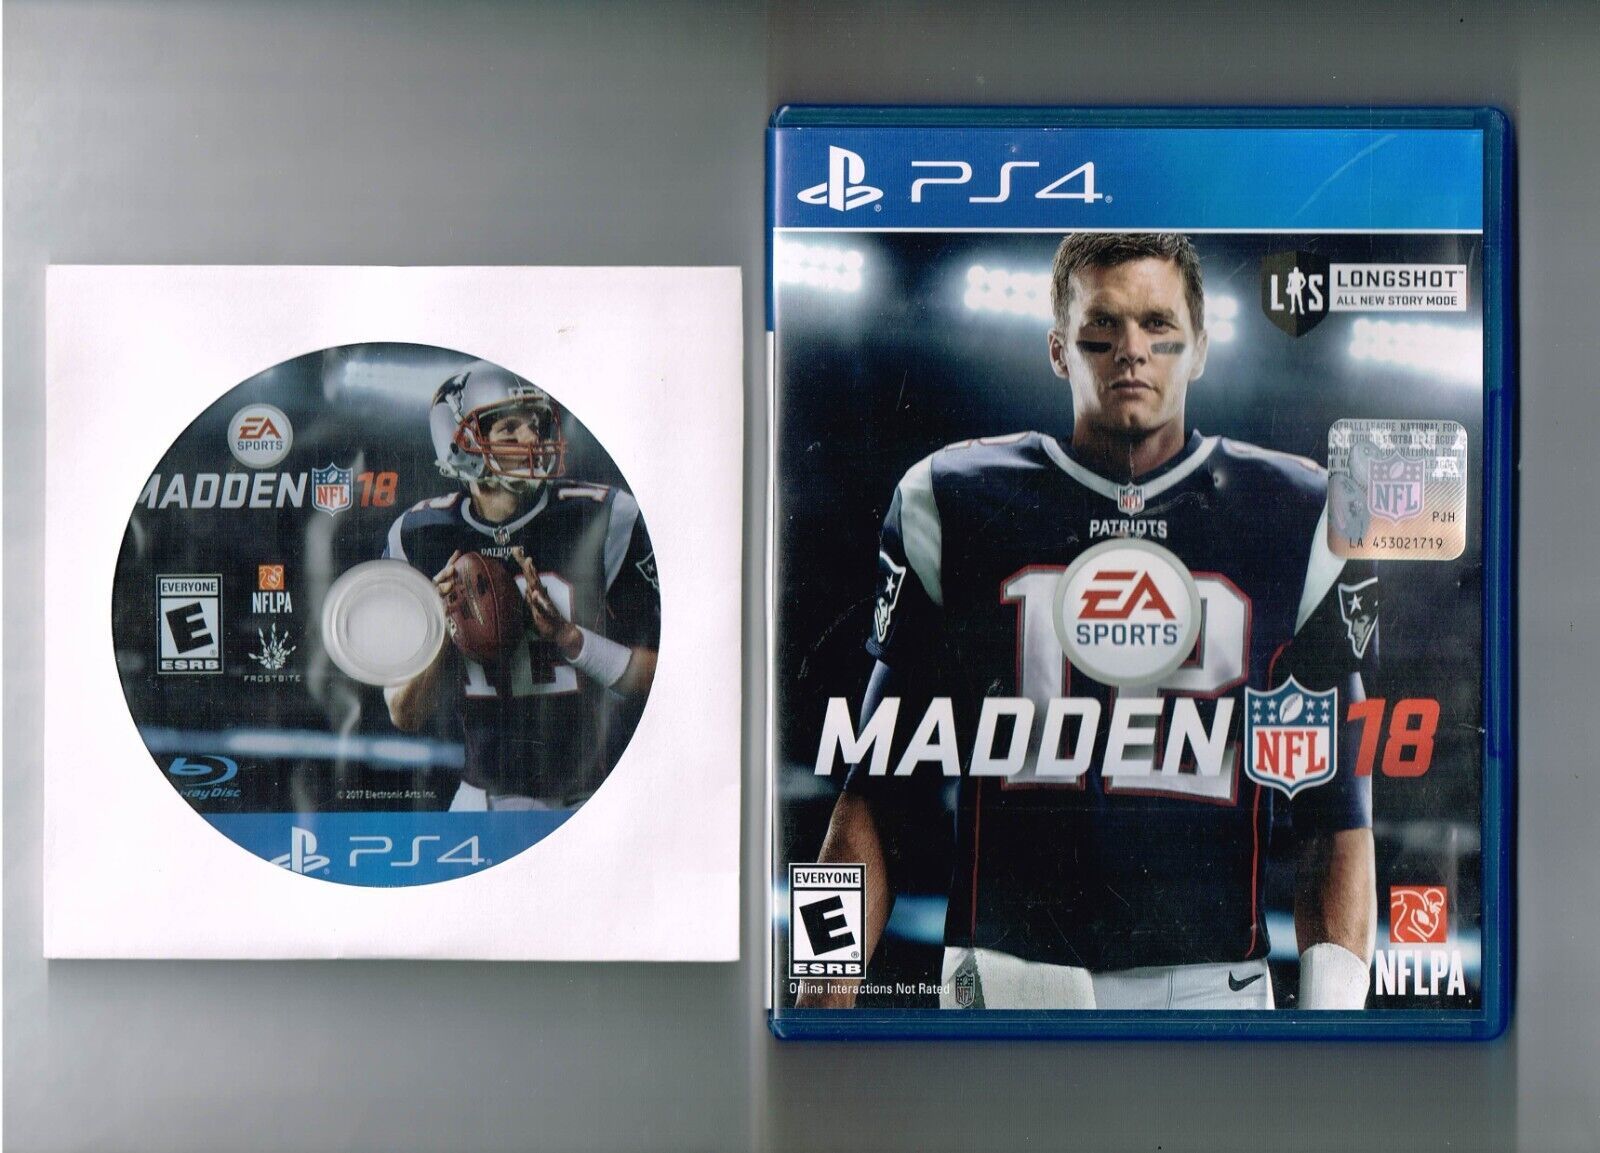 Primary image for Madden NFL 18 PS4 Game PlayStation 4 Disc and Case